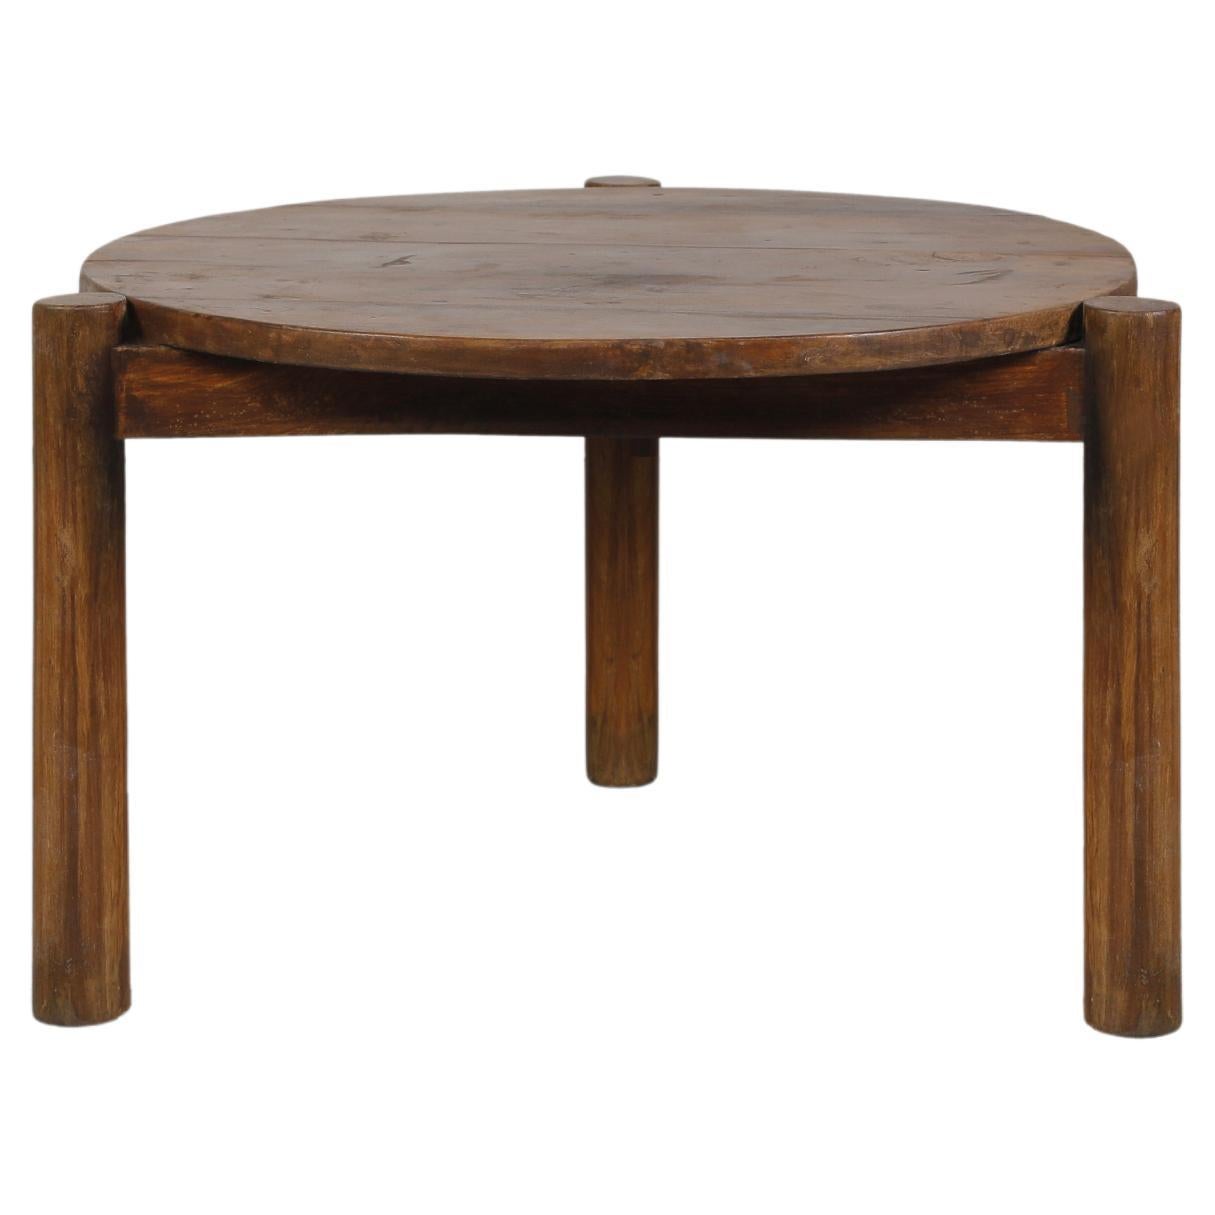 Pierre Jeanneret PJ-TB-04-A Round Low Table / Authentic Mid-Century Modern